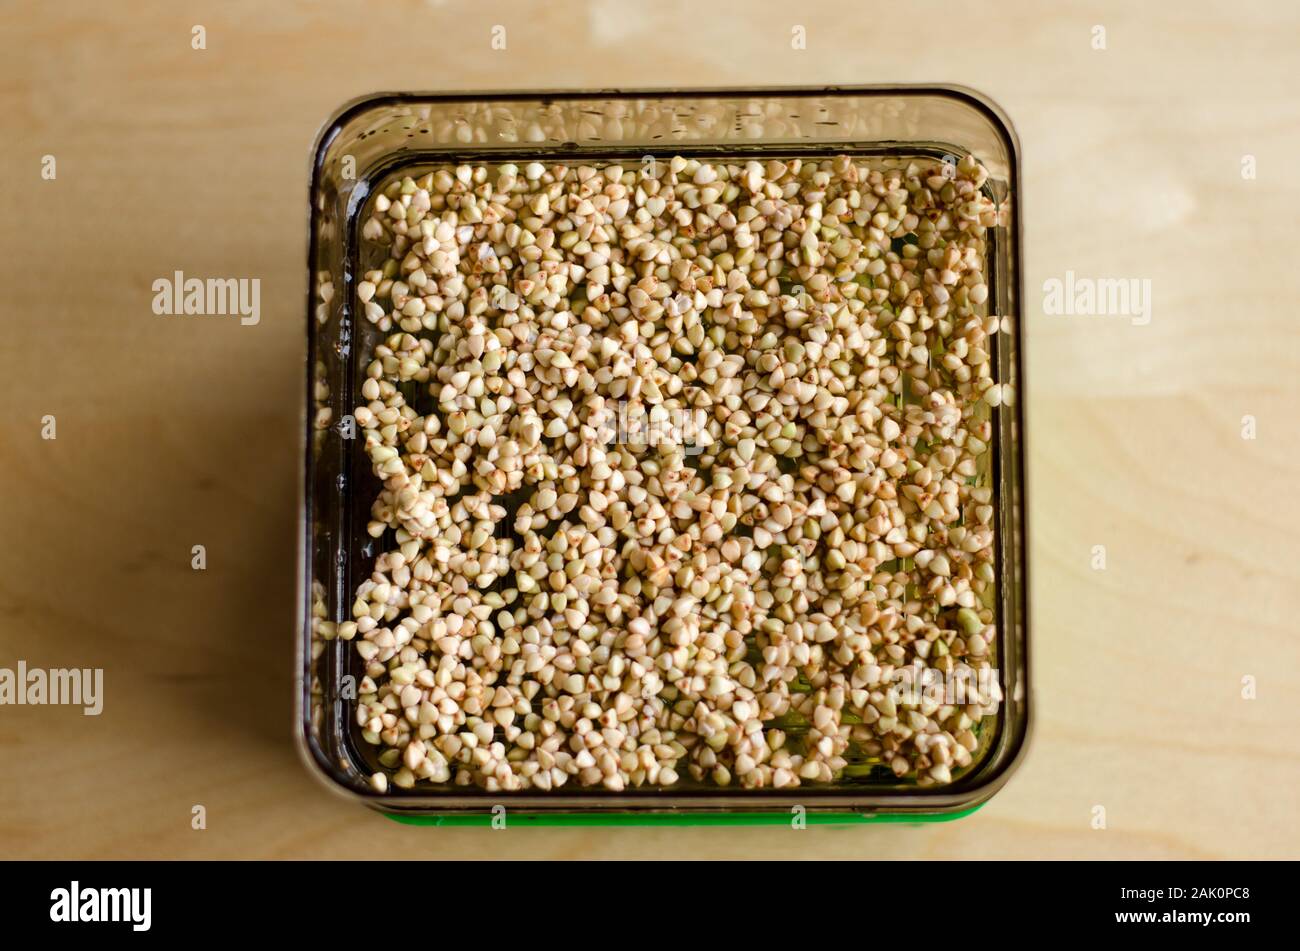 Buckwheat sprouting on a tray on a wooden table Stock Photo